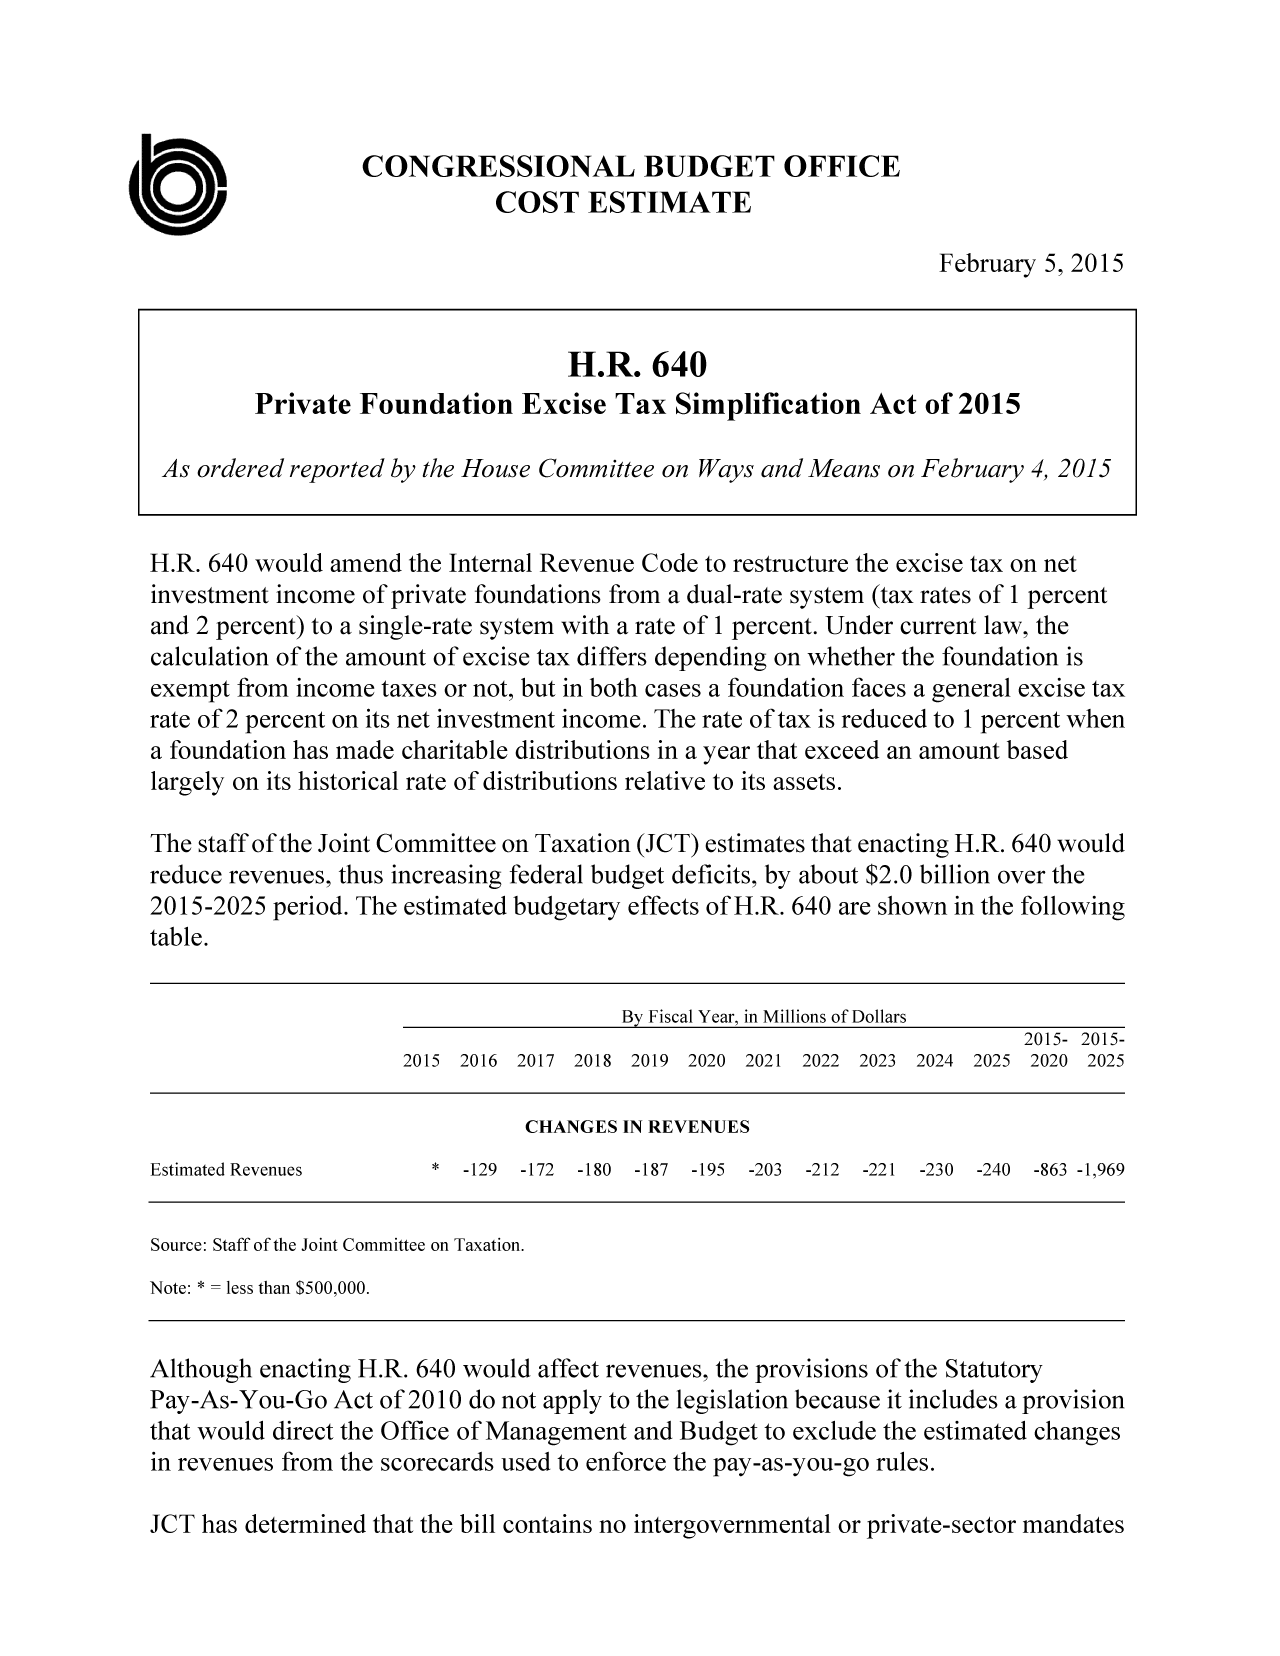 handle is hein.congrec/cbo2062 and id is 1 raw text is: CONGRESSIONAL BUDGET OFFICE
COST ESTIMATE

February 5, 2015

H.R. 640 would amend the Internal Revenue Code to restructure the excise tax on net
investment income of private foundations from a dual-rate system (tax rates of 1 percent
and 2 percent) to a single-rate system with a rate of 1 percent. Under current law, the
calculation of the amount of excise tax differs depending on whether the foundation is
exempt from income taxes or not, but in both cases a foundation faces a general excise tax
rate of 2 percent on its net investment income. The rate of tax is reduced to 1 percent when
a foundation has made charitable distributions in a year that exceed an amount based
largely on its historical rate of distributions relative to its assets.
The staff of the Joint Committee on Taxation (JCT) estimates that enacting H.R. 640 would
reduce revenues, thus increasing federal budget deficits, by about $2.0 billion over the
2015-2025 period. The estimated budgetary effects of H.R. 640 are shown in the following
table.
By Fiscal Year, in Millions of Dollars
2015- 2015-
2015 2016 2017 2018 2019 2020 2021 2022 2023 2024 2025 2020 2025
CHANGES IN REVENUES
Estimated Revenues       * -129 -172 -180 -187 -195 -203 -212 -221 -230 -240 -863 -1,969

Source: Staff of the Joint Committee on Taxation.
Note: * = less than $500,000.

Although enacting H.R. 640 would affect revenues, the provisions of the Statutory
Pay-As-You-Go Act of 2010 do not apply to the legislation because it includes a provision
that would direct the Office of Management and Budget to exclude the estimated changes
in revenues from the scorecards used to enforce the pay-as-you-go rules.
JCT has determined that the bill contains no intergovernmental or private-sector mandates

H.R. 640
Private Foundation Excise Tax Simplification Act of 2015
As ordered reported by the House Committee on Ways and Means on February 4, 2015


